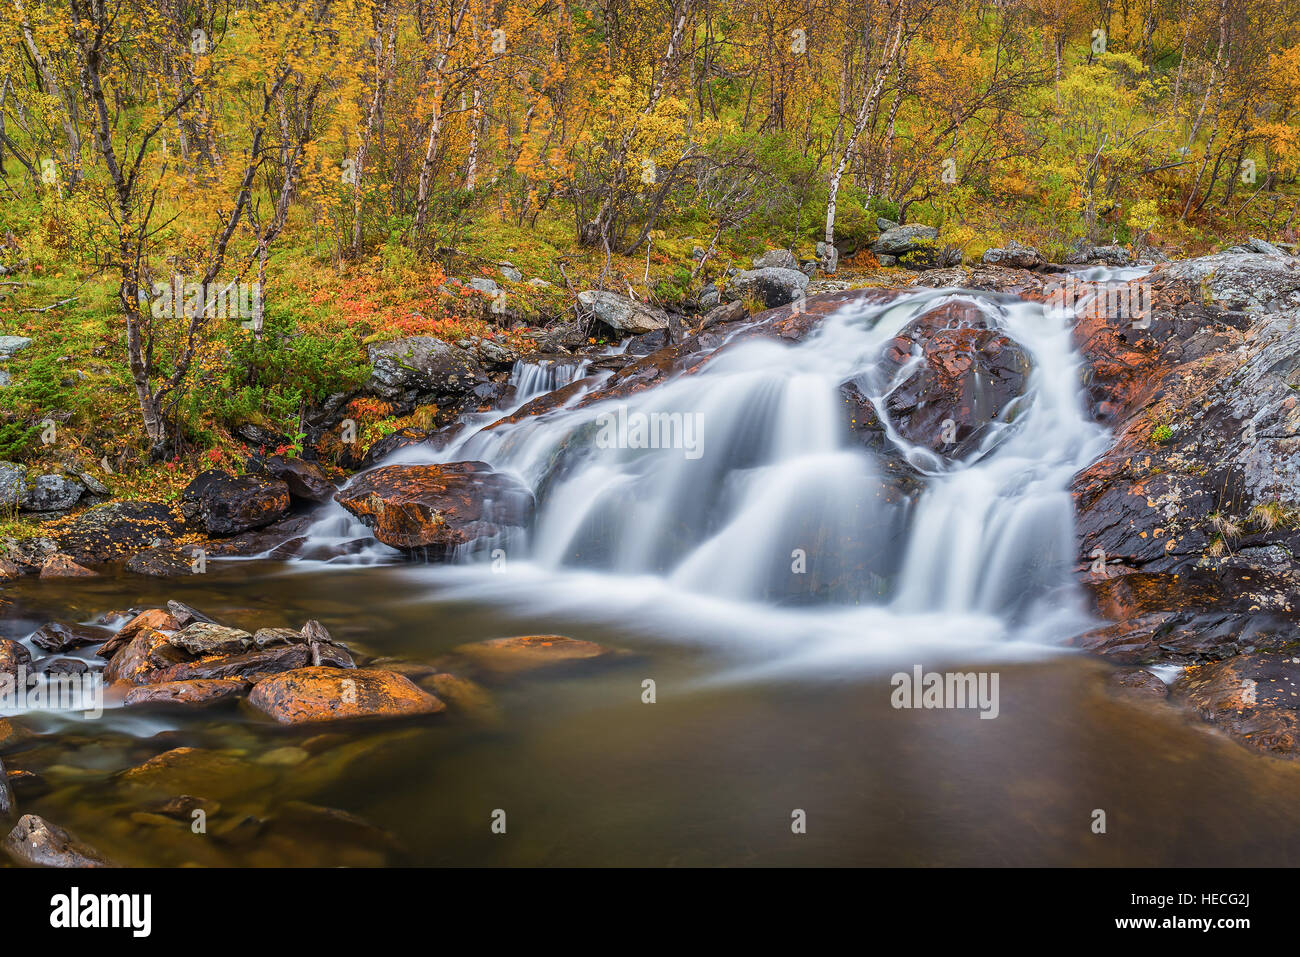 Waterfall in autumnal landscape Stock Photo